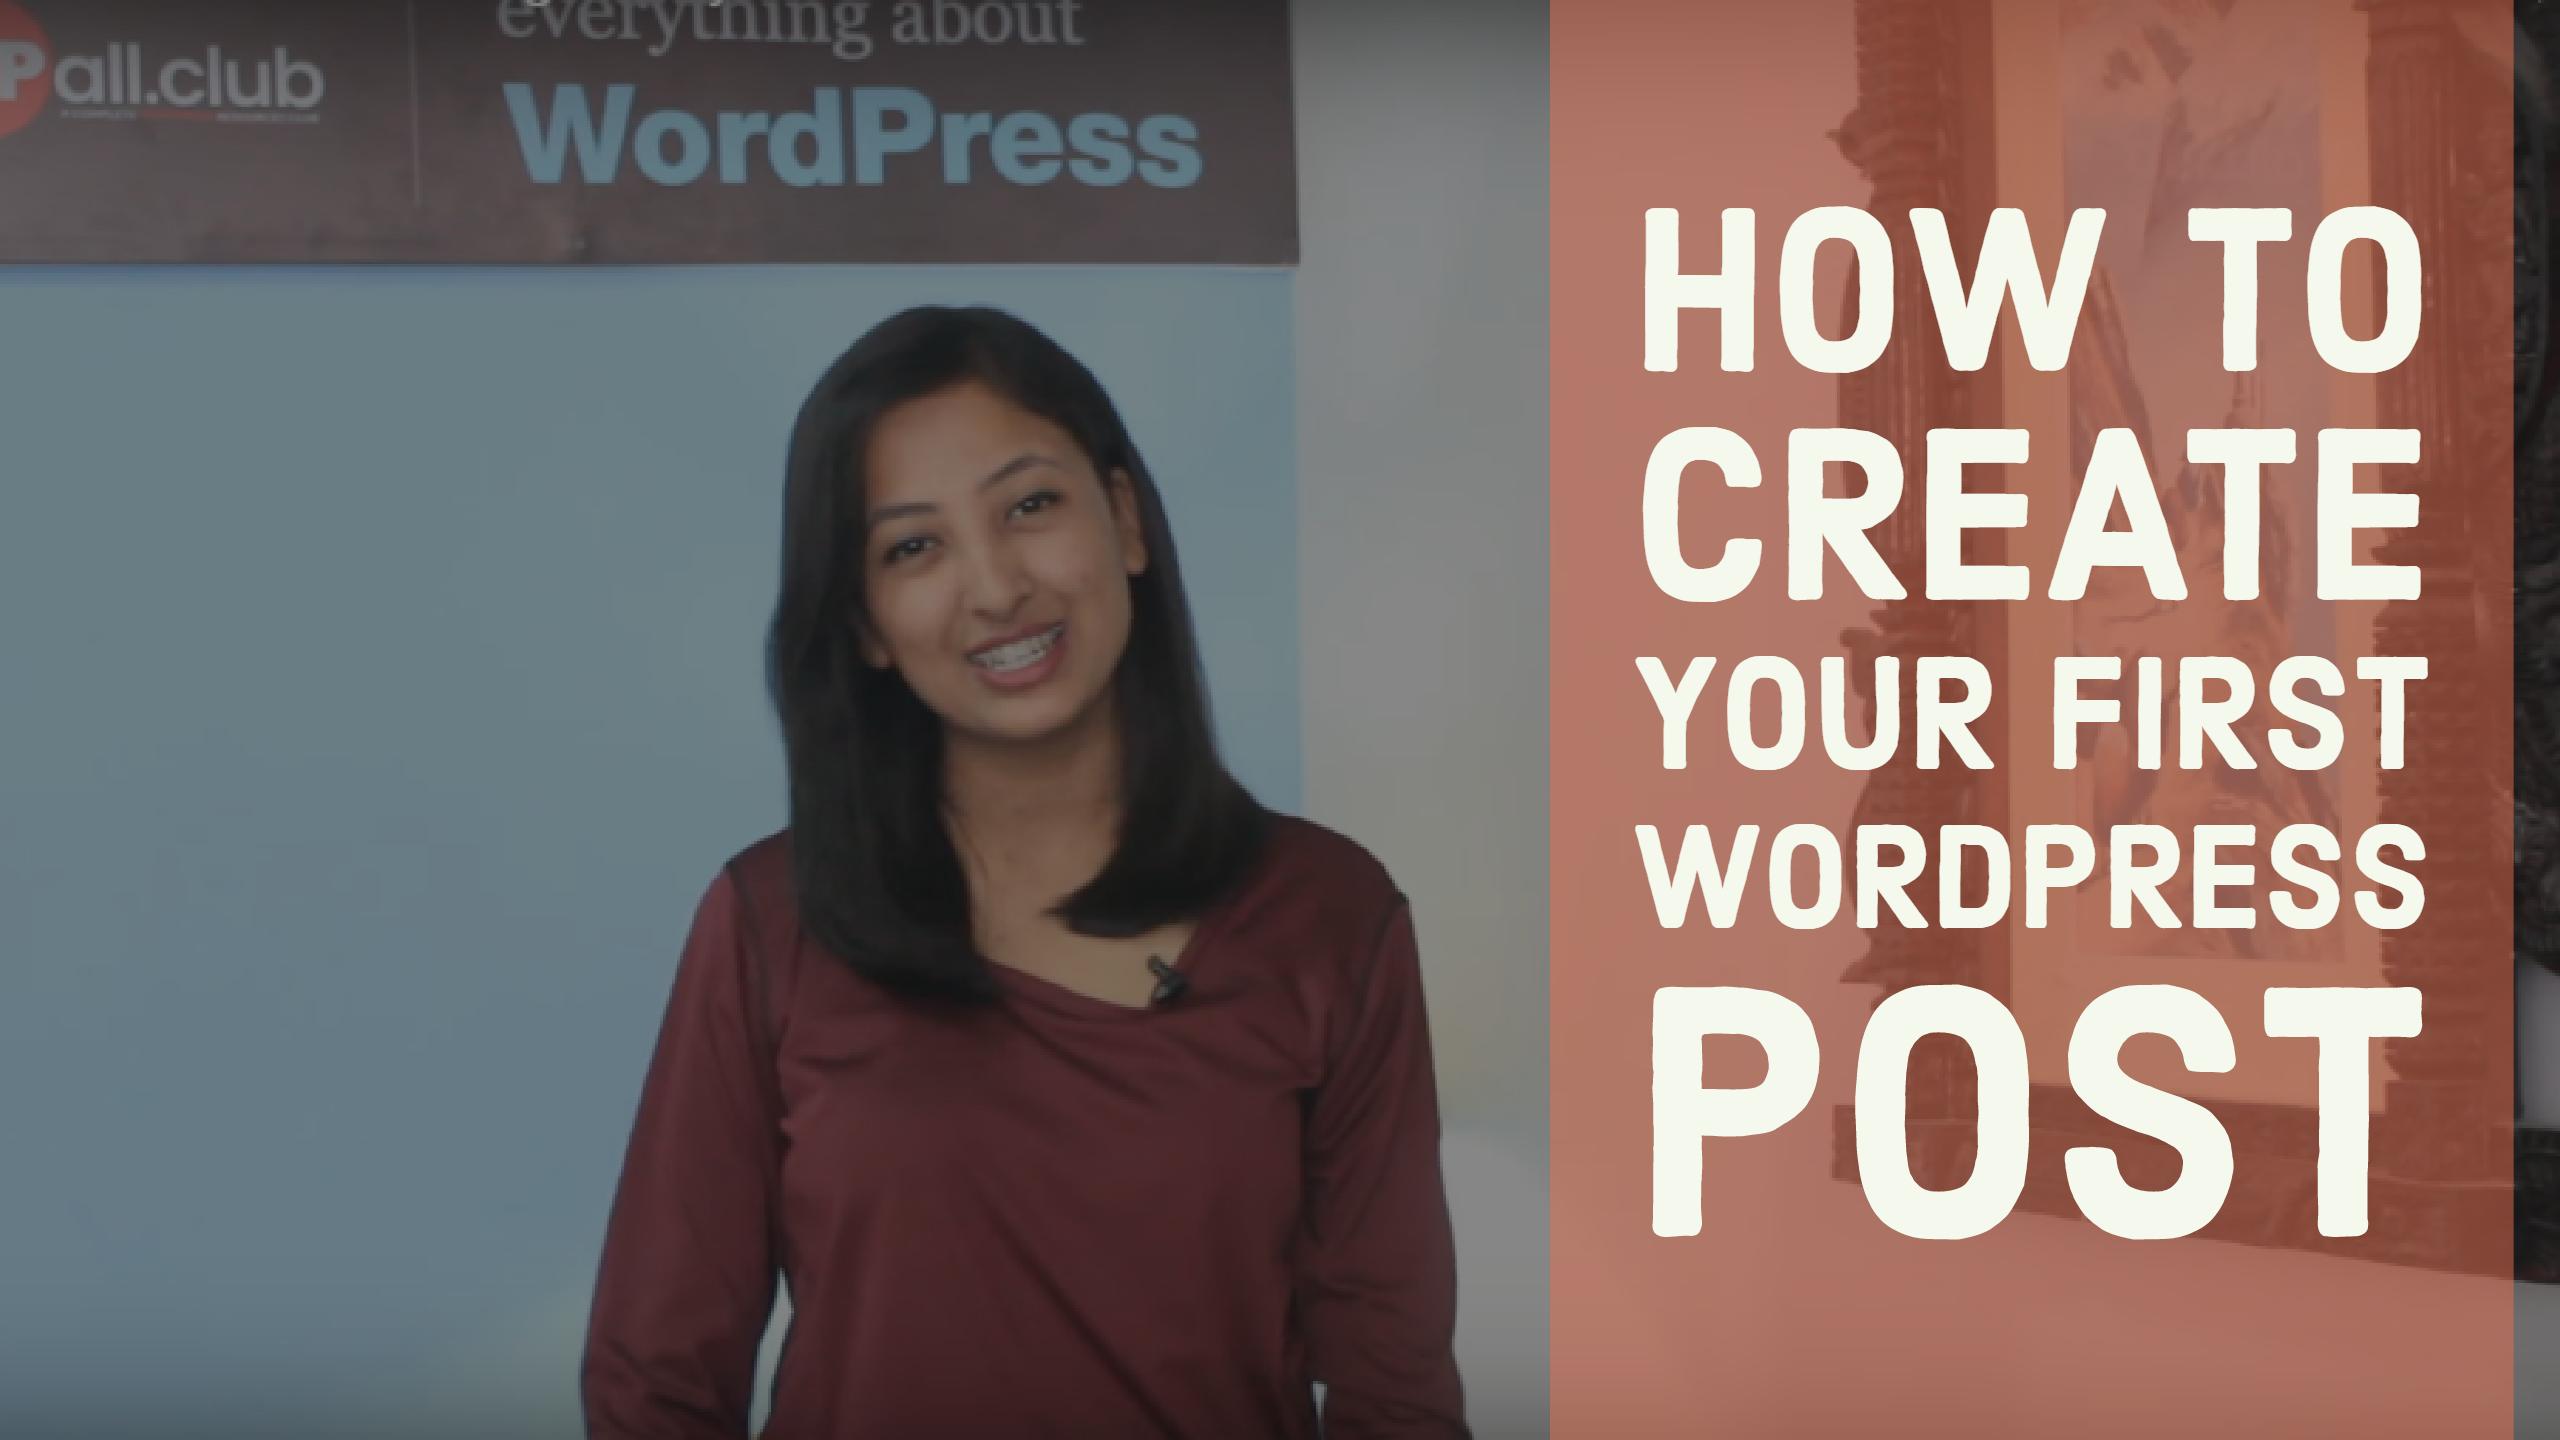 How to create your first WordPress Post